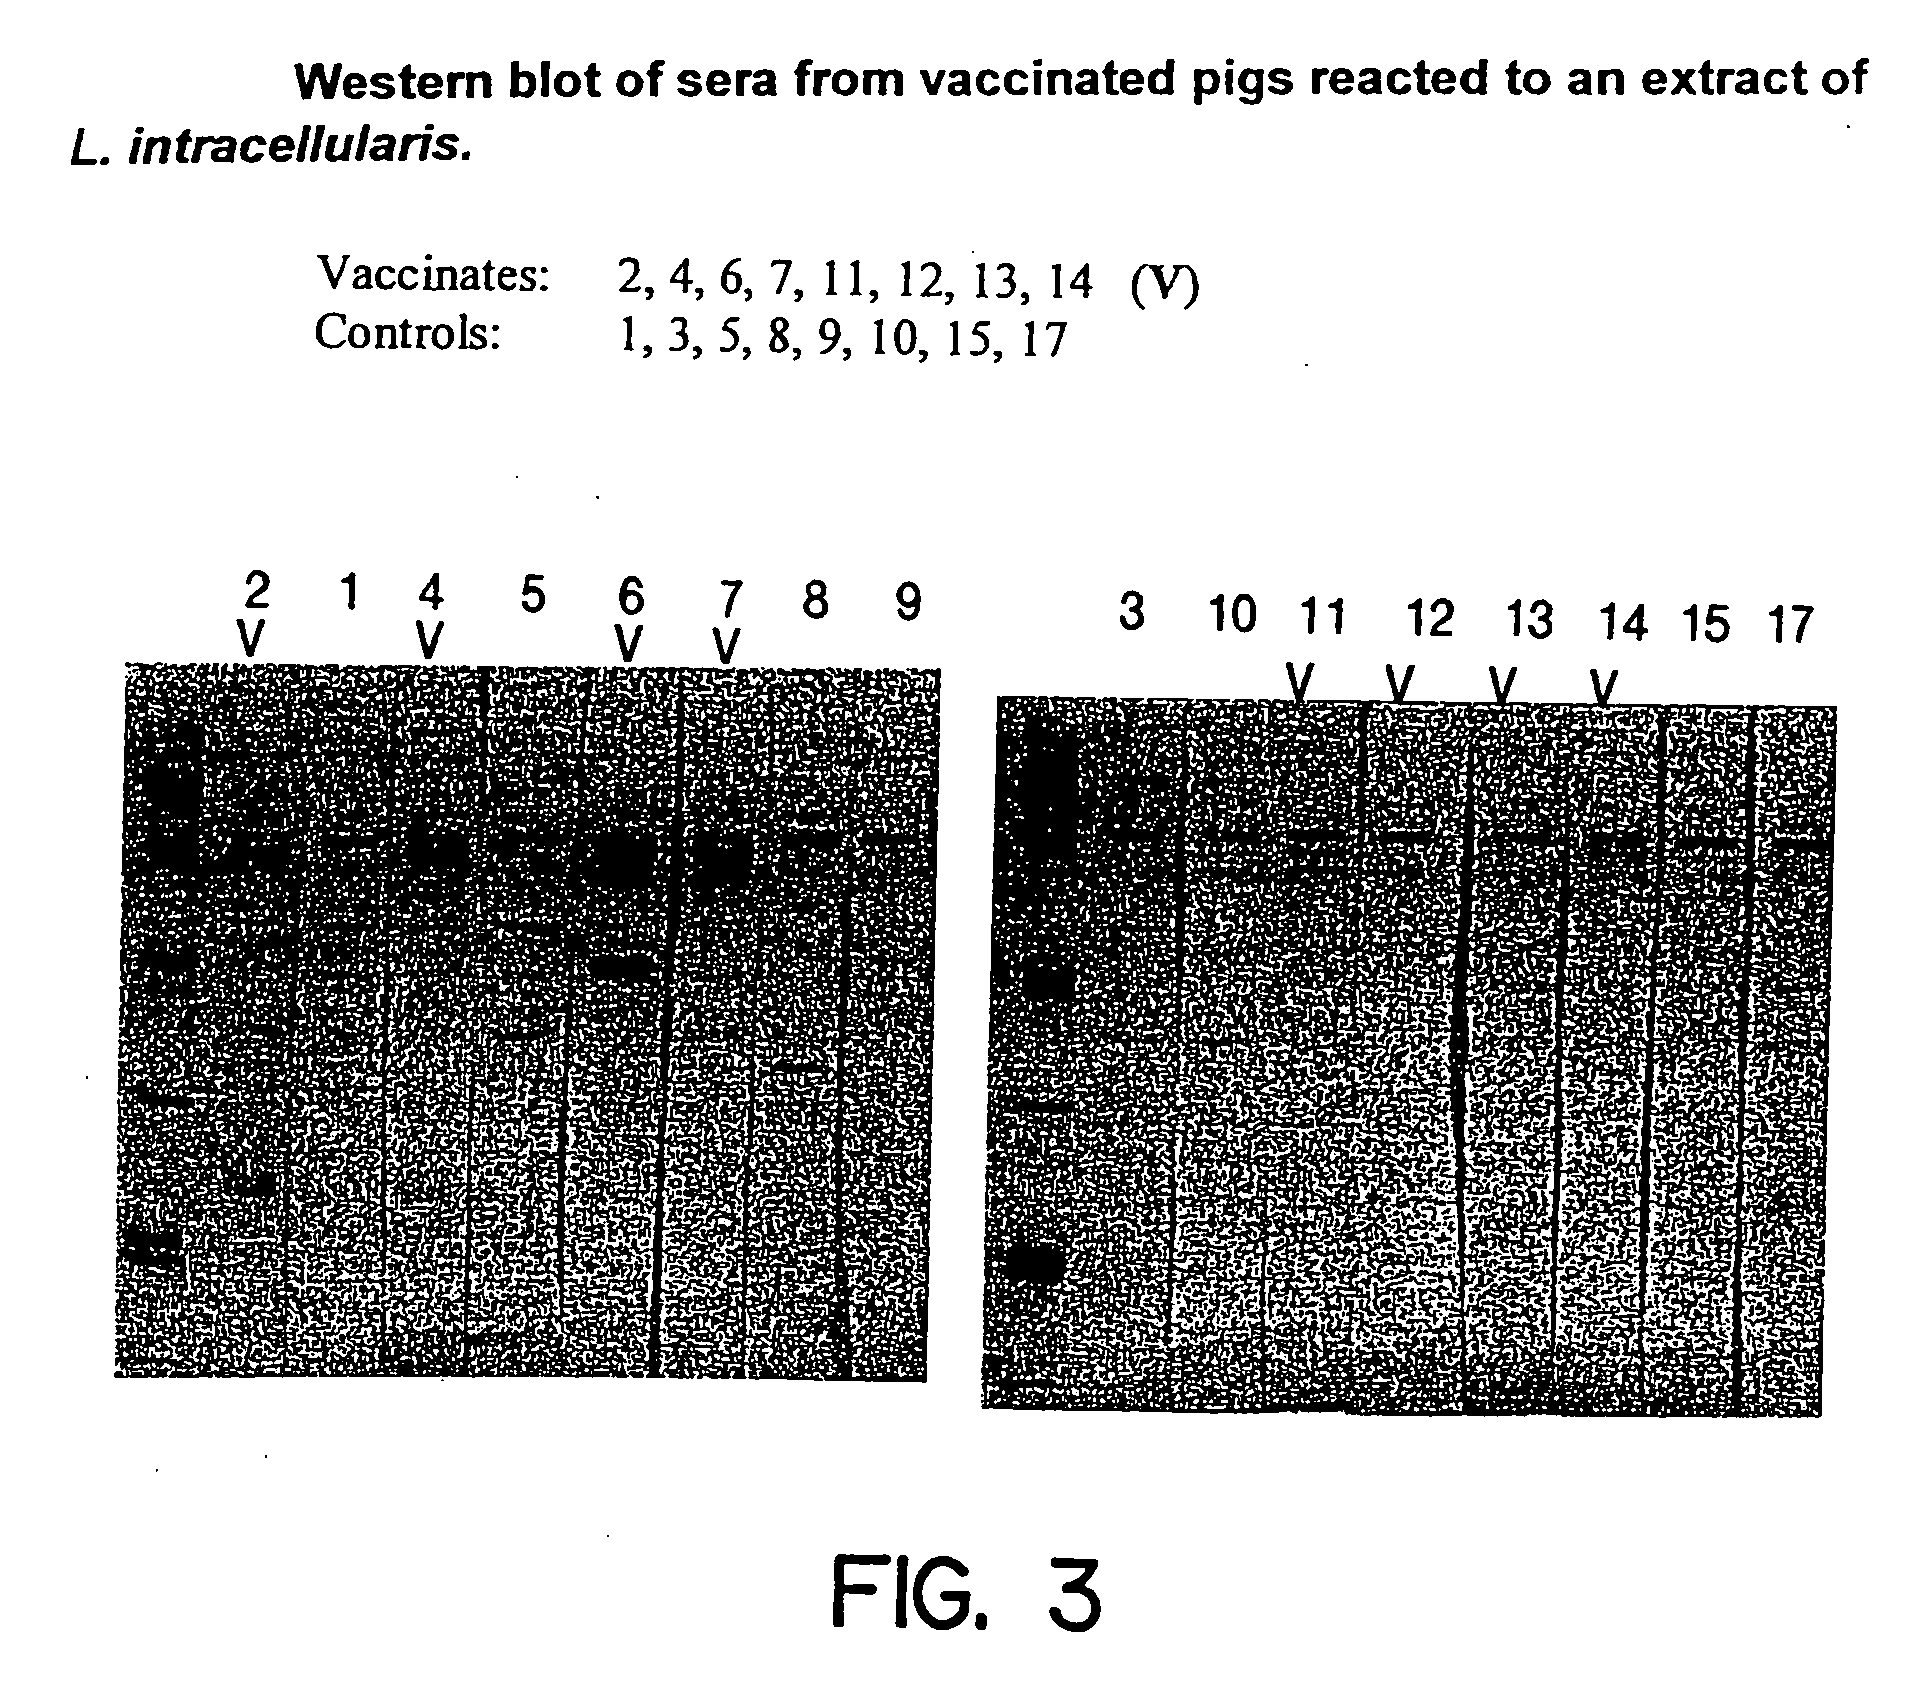 Vaccines for proliferative ileitis and methods of making and using the same